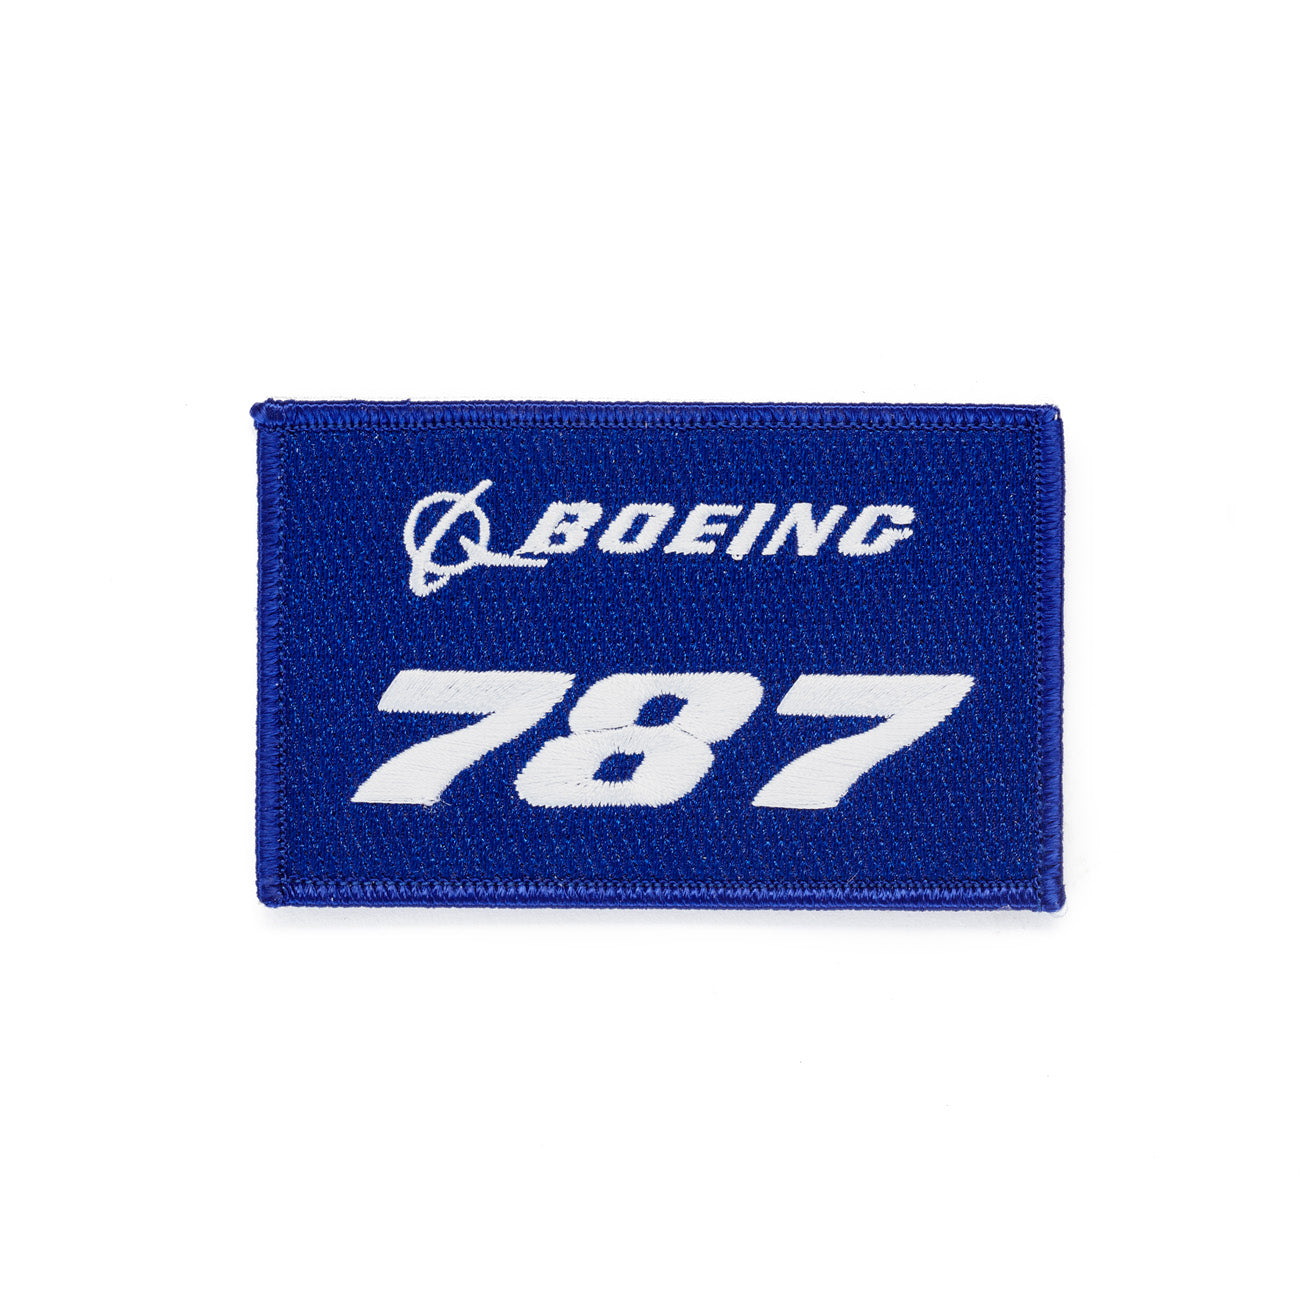 Boeing 787 Stratotype Embroidered Patch (3060236091514)